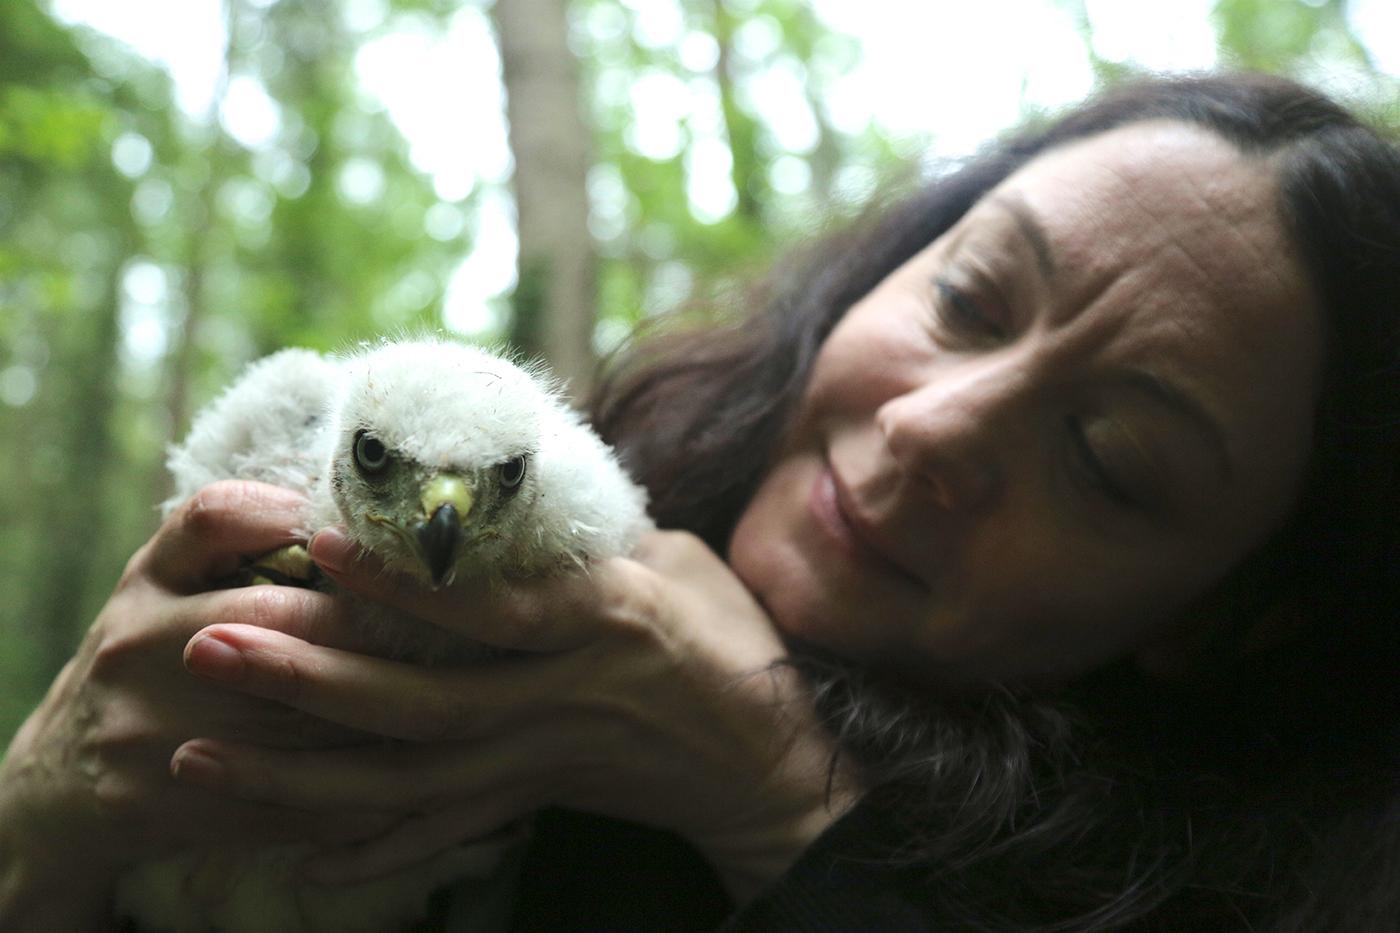 Helen Macdonald, author of H is for Hawk, with a goshawk chick. Photo: Courtesy Mike Birkhead Associates